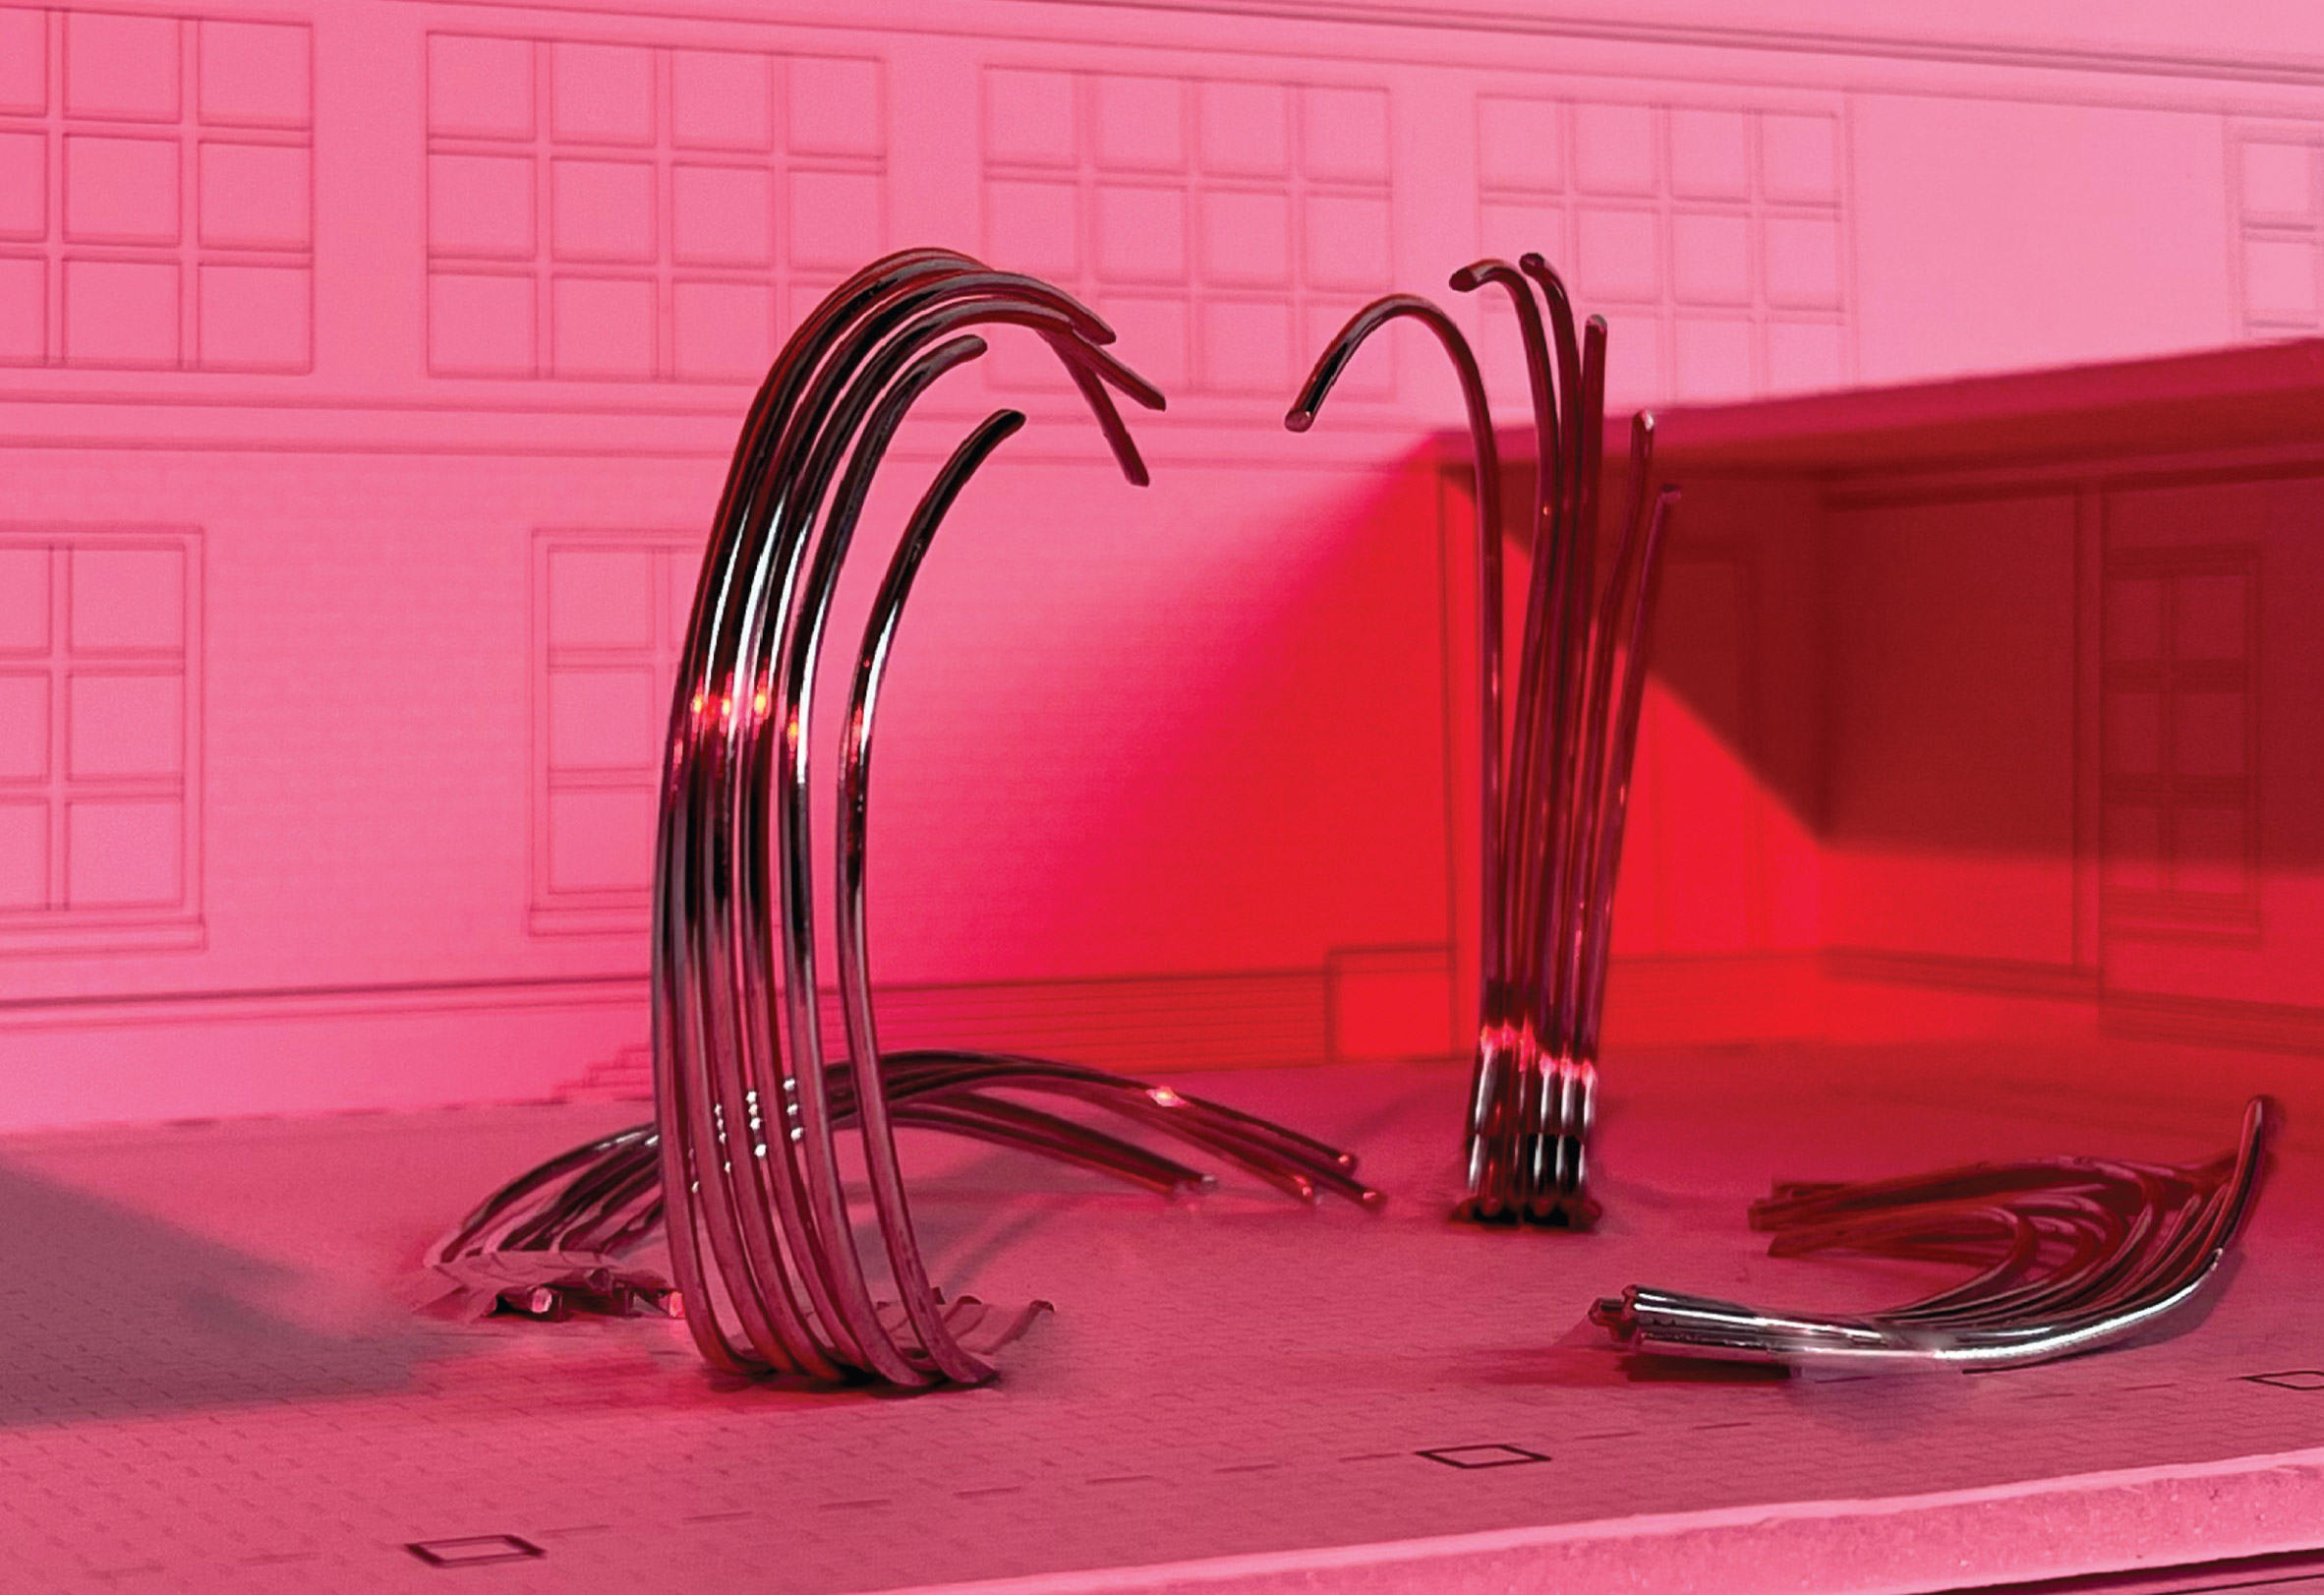 Photograph of pink model with arching metal structures